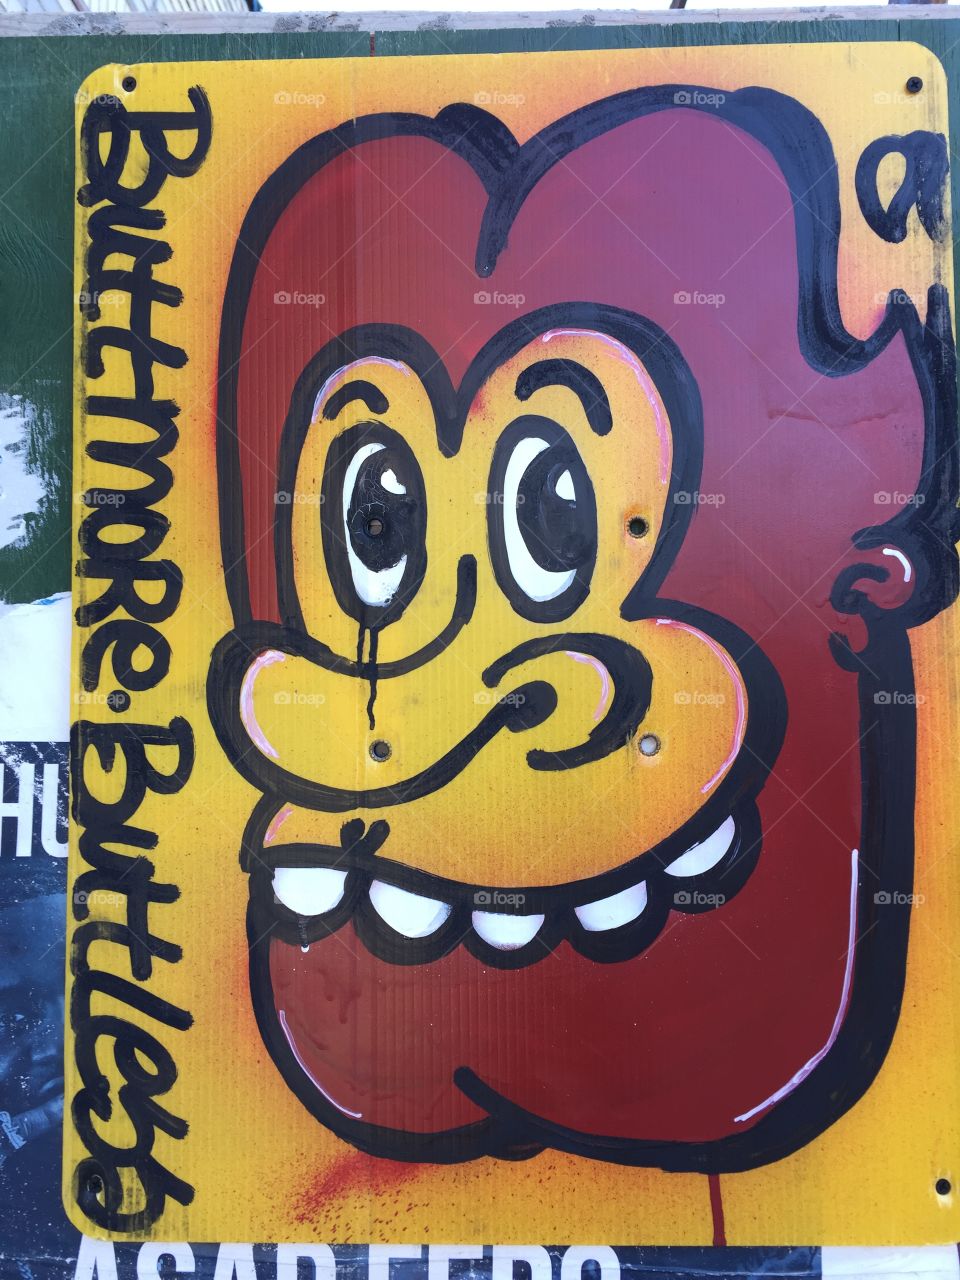 Photo of graffiti on construction site . Yellow and brown colors are used to depict the face of a lion or man face. The face is smiling. It depicts a retro urban art. the graffiti also depicts a monster . 